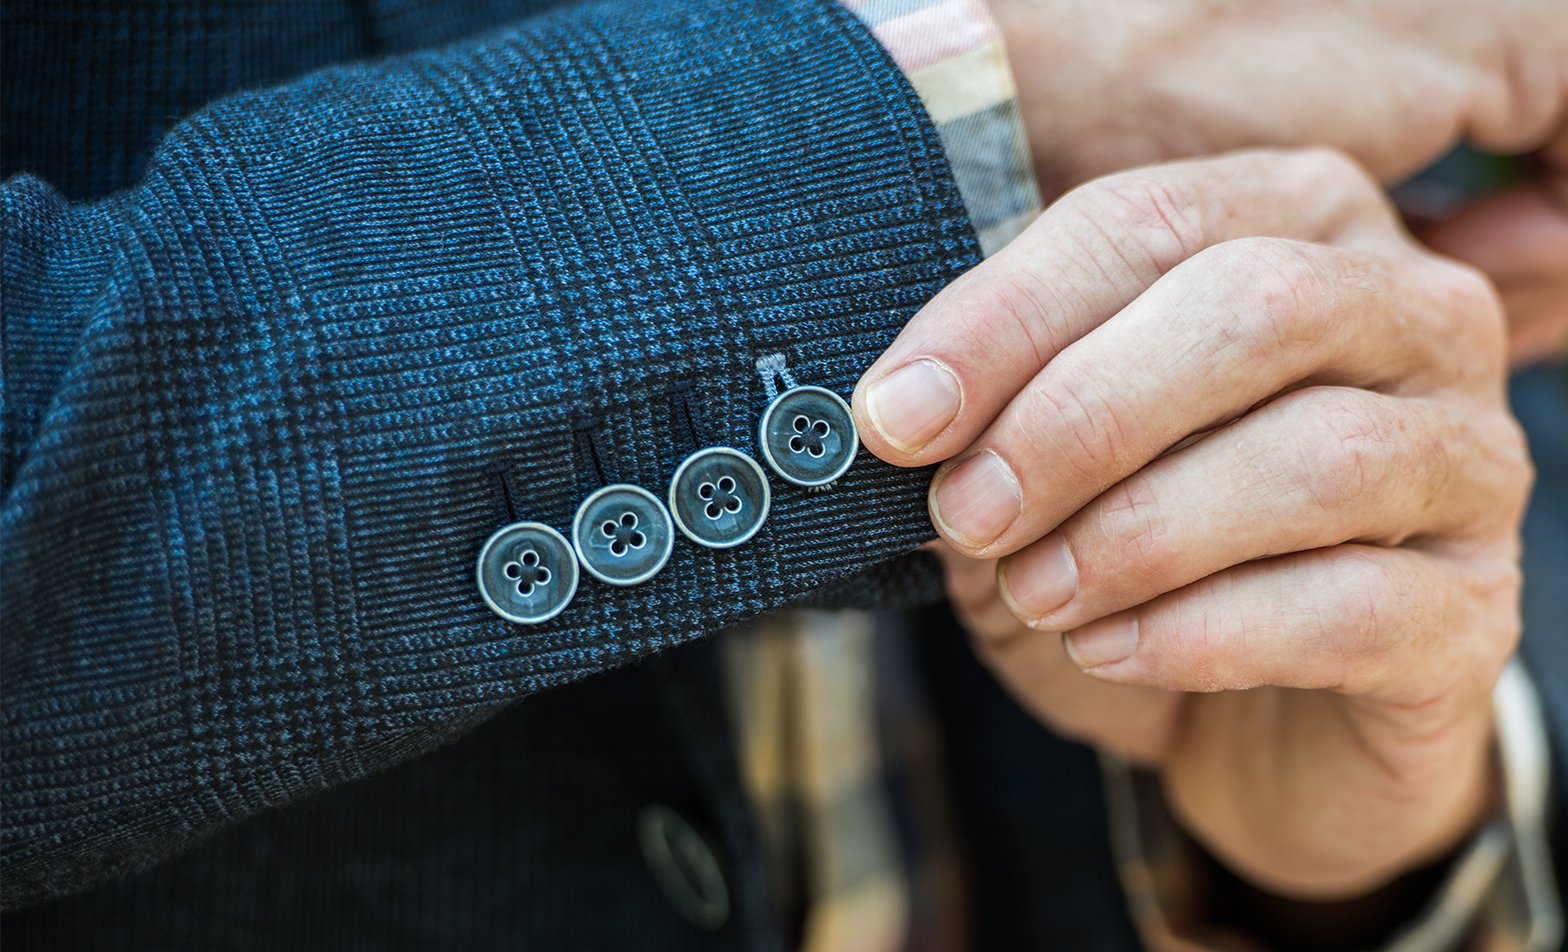 Our team of stylists will work with you to customize your blazers and dress pants to match your fit and style preferences. All garments are hand-crafted just for you and delivered within 3 weeks.